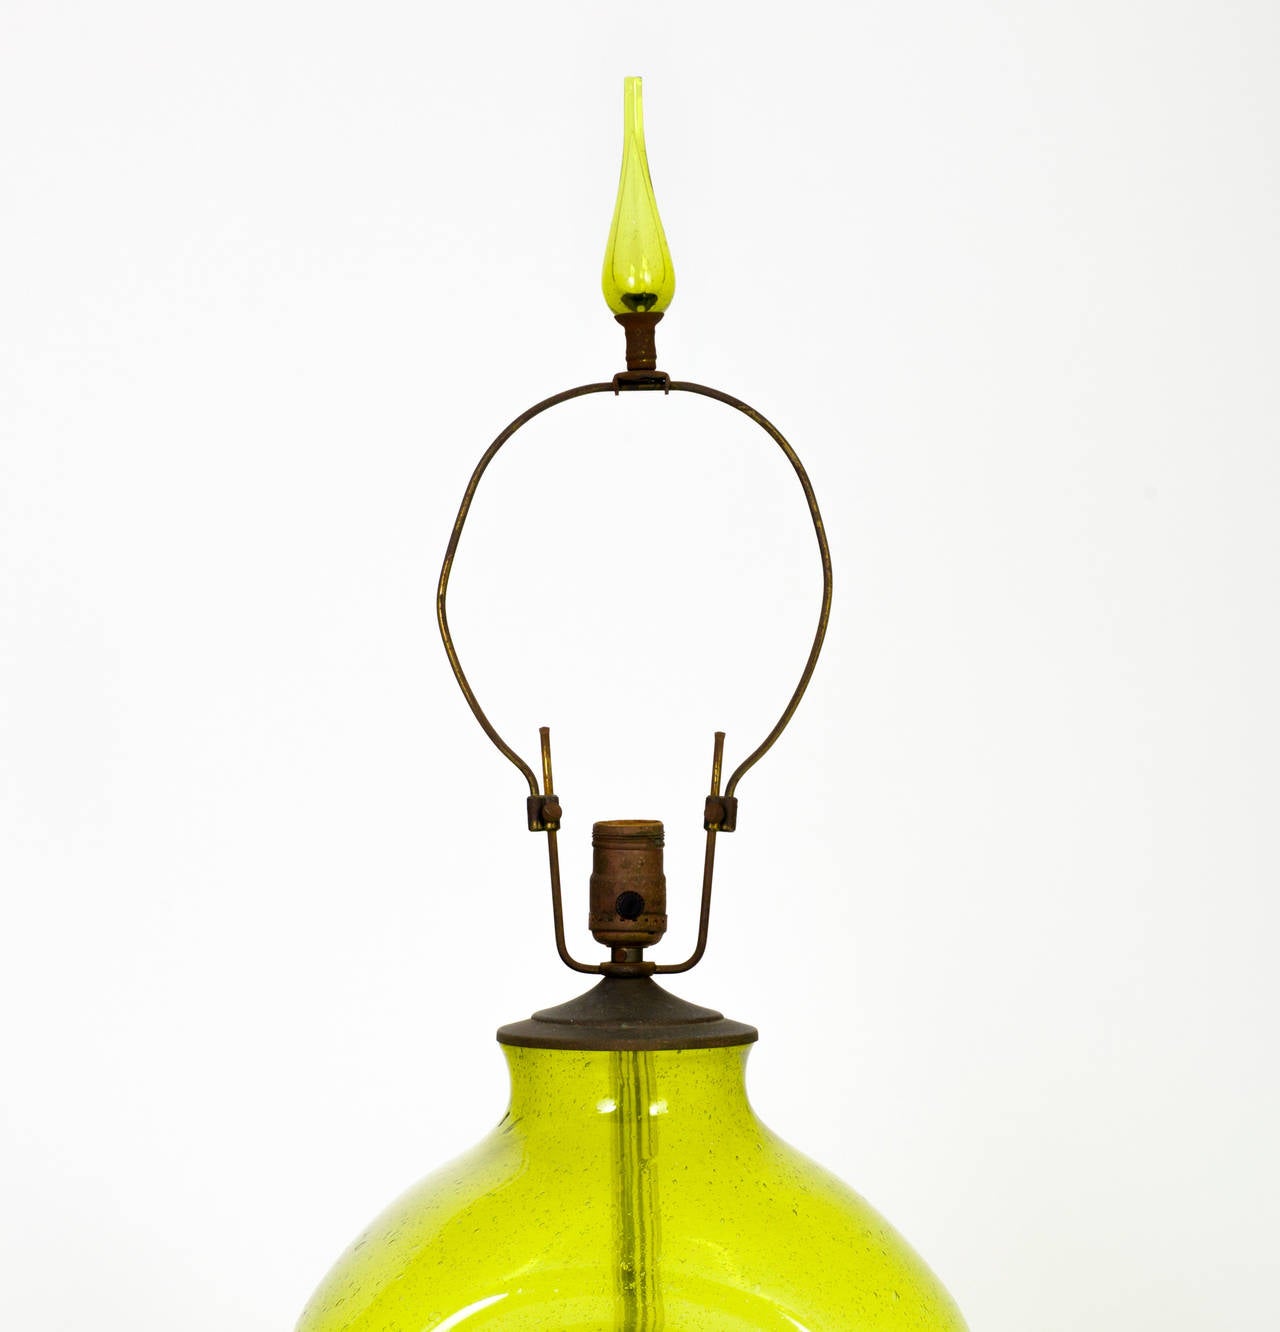 Bulbous table lamp with pinched sides executed in lime-colored blown glass and supported by a round, lacquered wood foot, designed by Wayne Husted for Blenko. Original, matching glass finial and adjustable harp included.

Dimensions: Height of